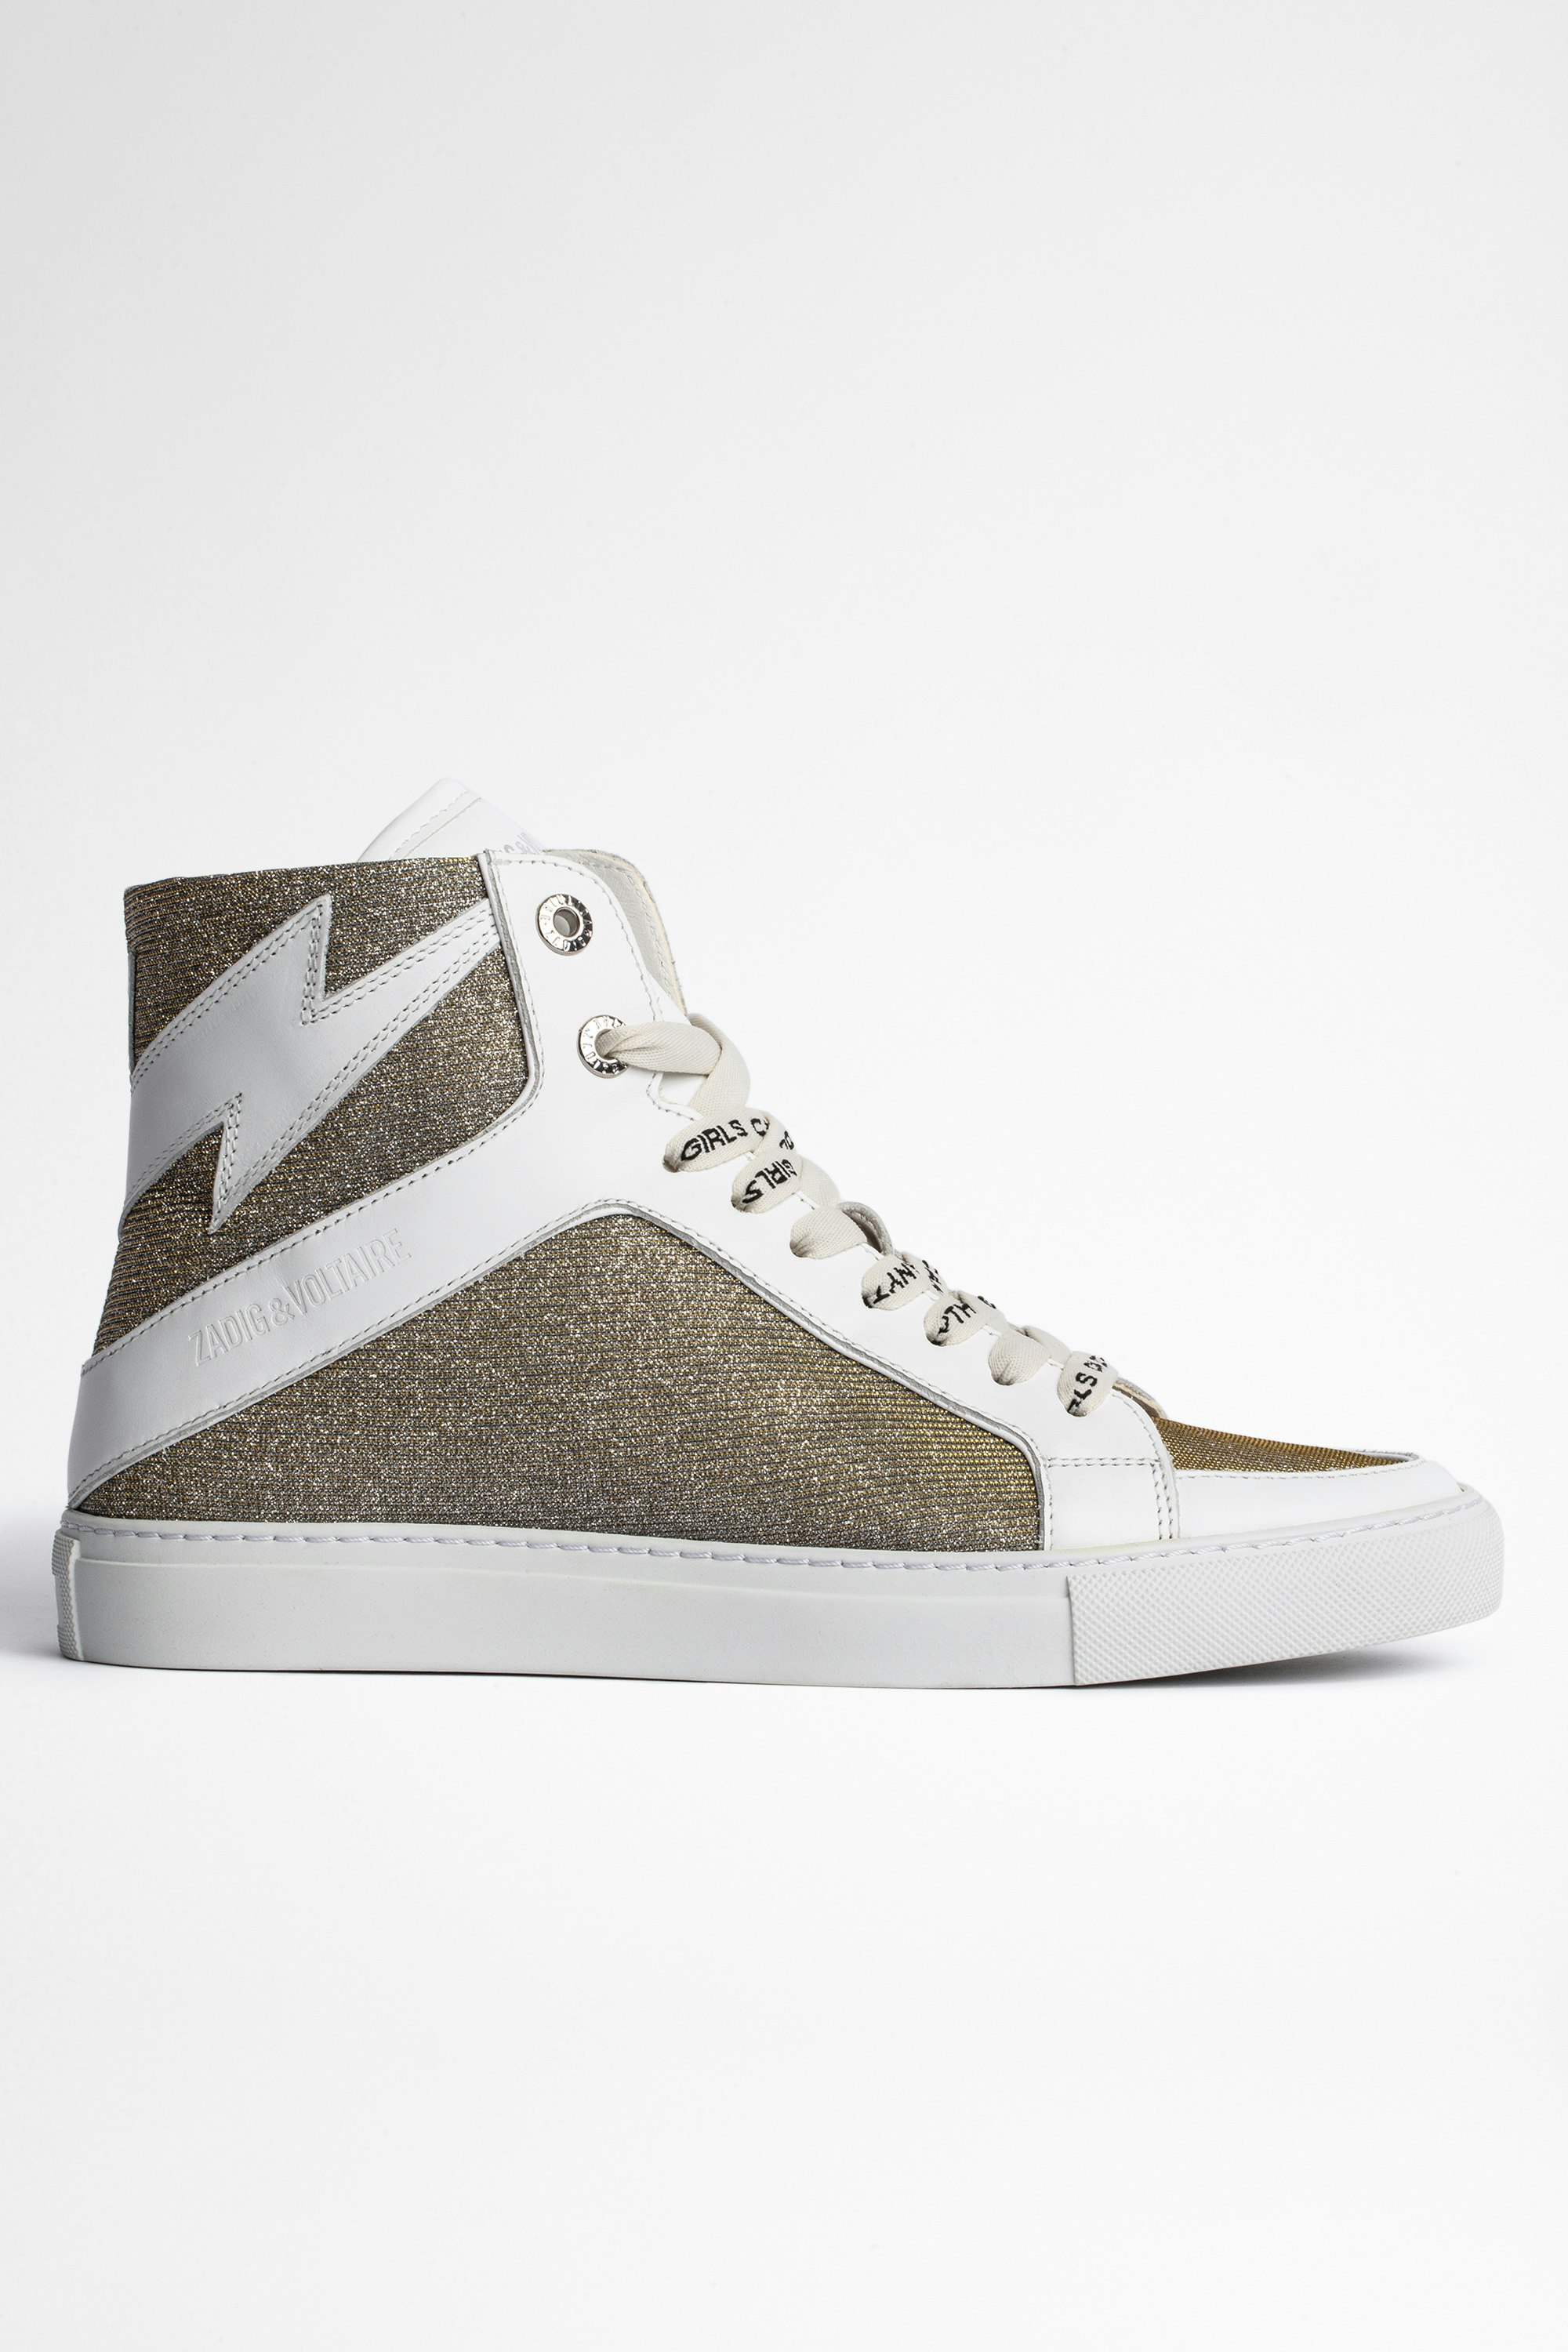 ZV1747 High Flash スニーカー Women's high-top sneakers in smooth white leather and silver glittery fabric